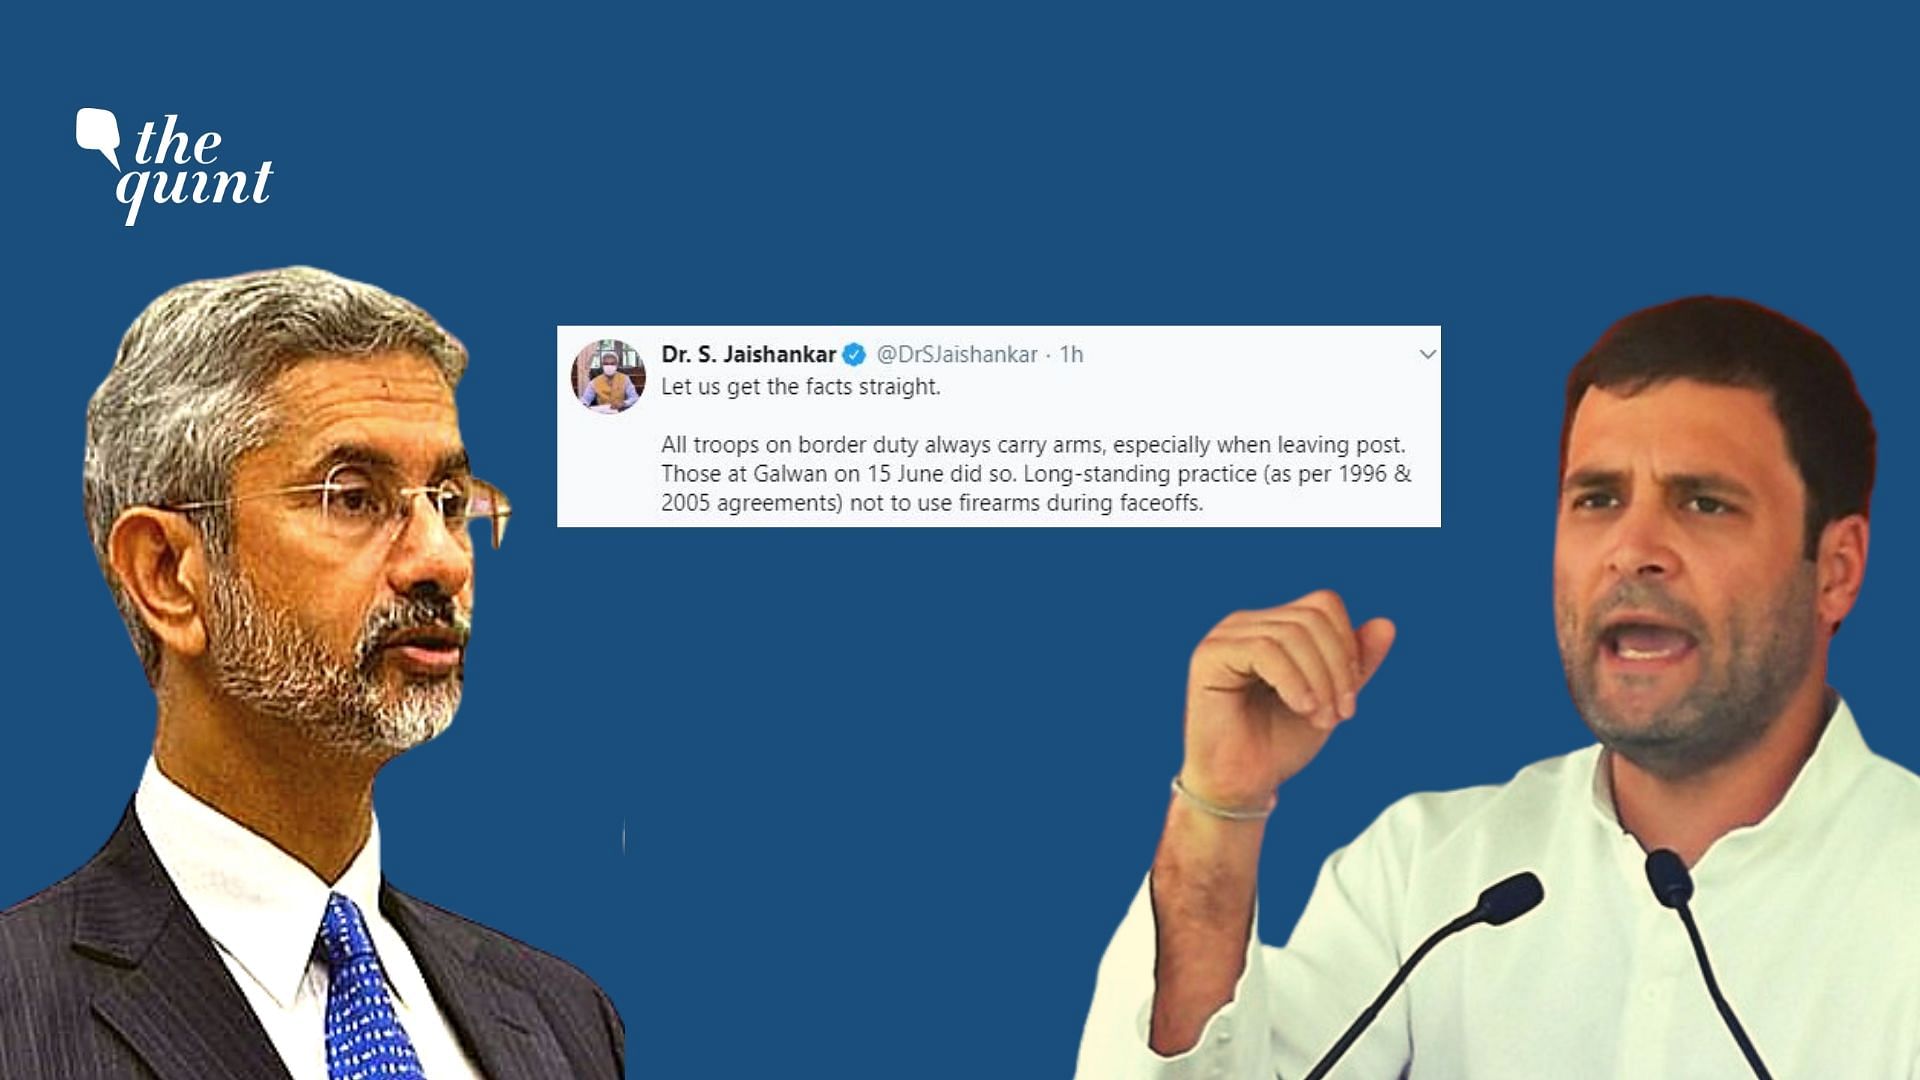 Union Minister of External Affairs has now taken the war of words to Twitter by asking him to “get his facts straight.”